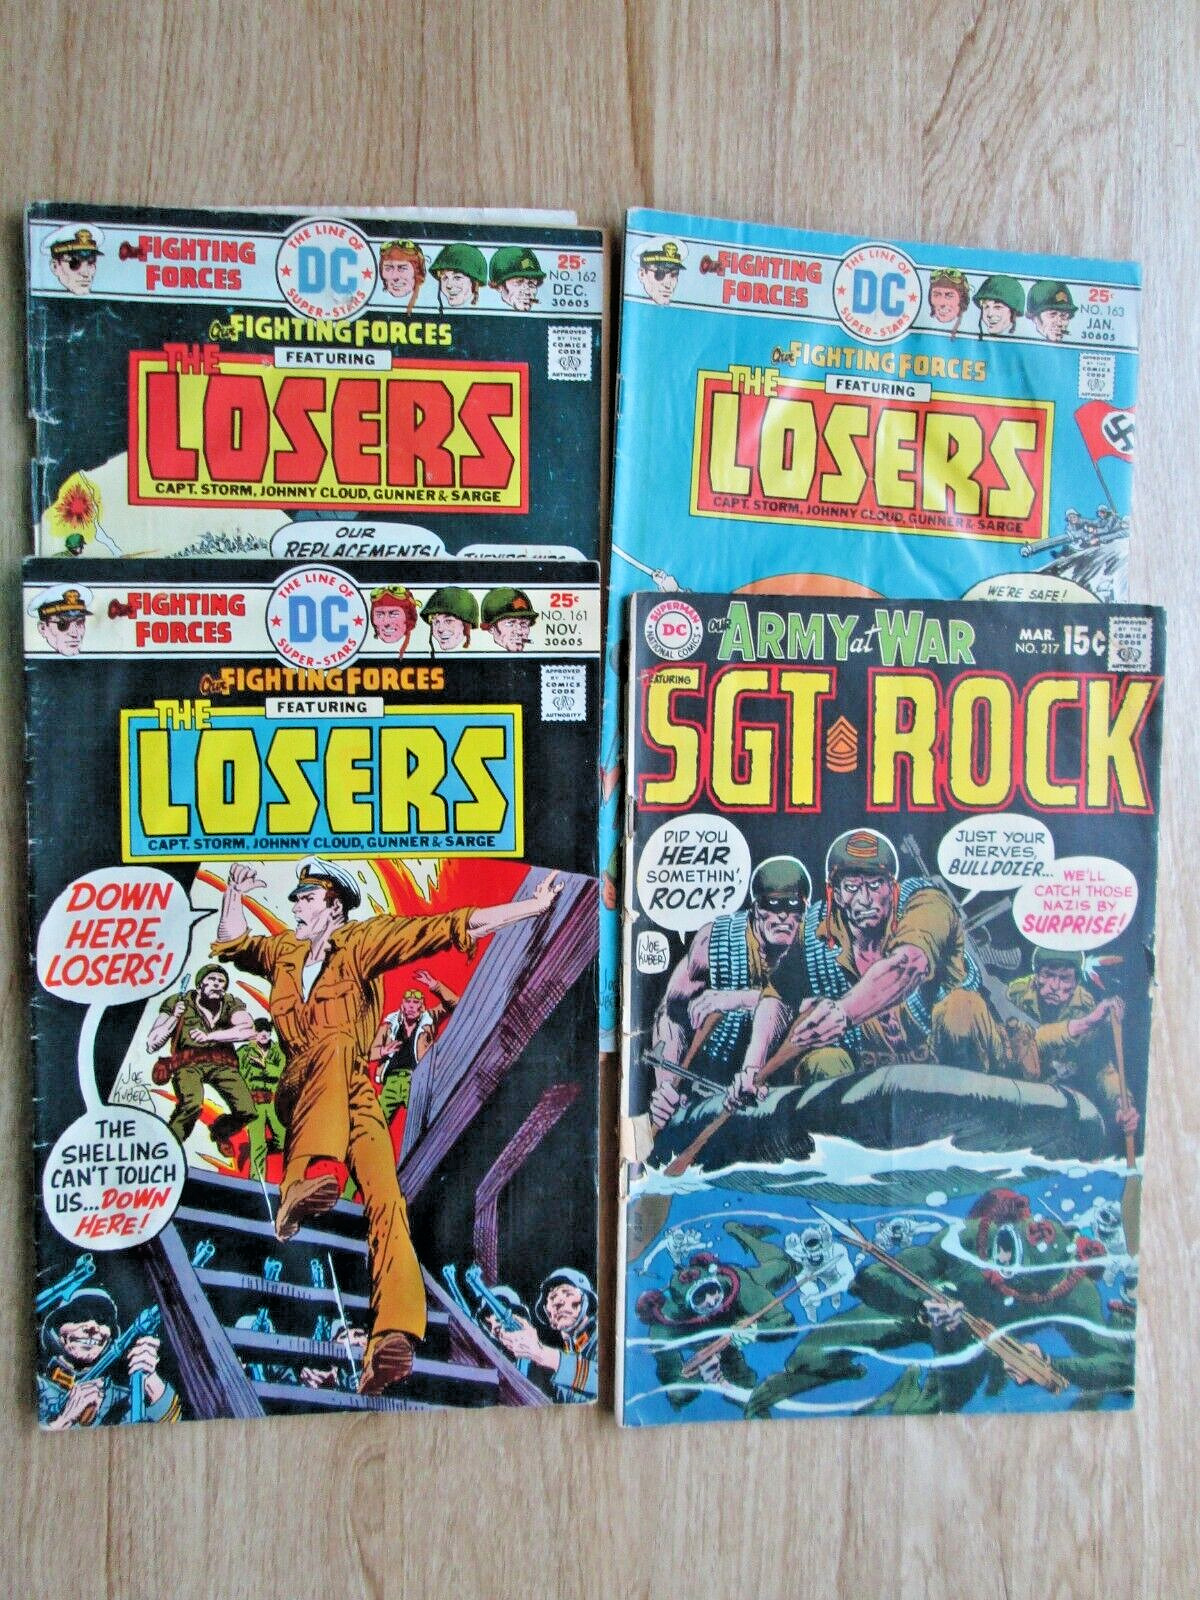 Lot of 4 War SGT. ROCK Army at War & Fighting Forces The Losers DC Comics WW2